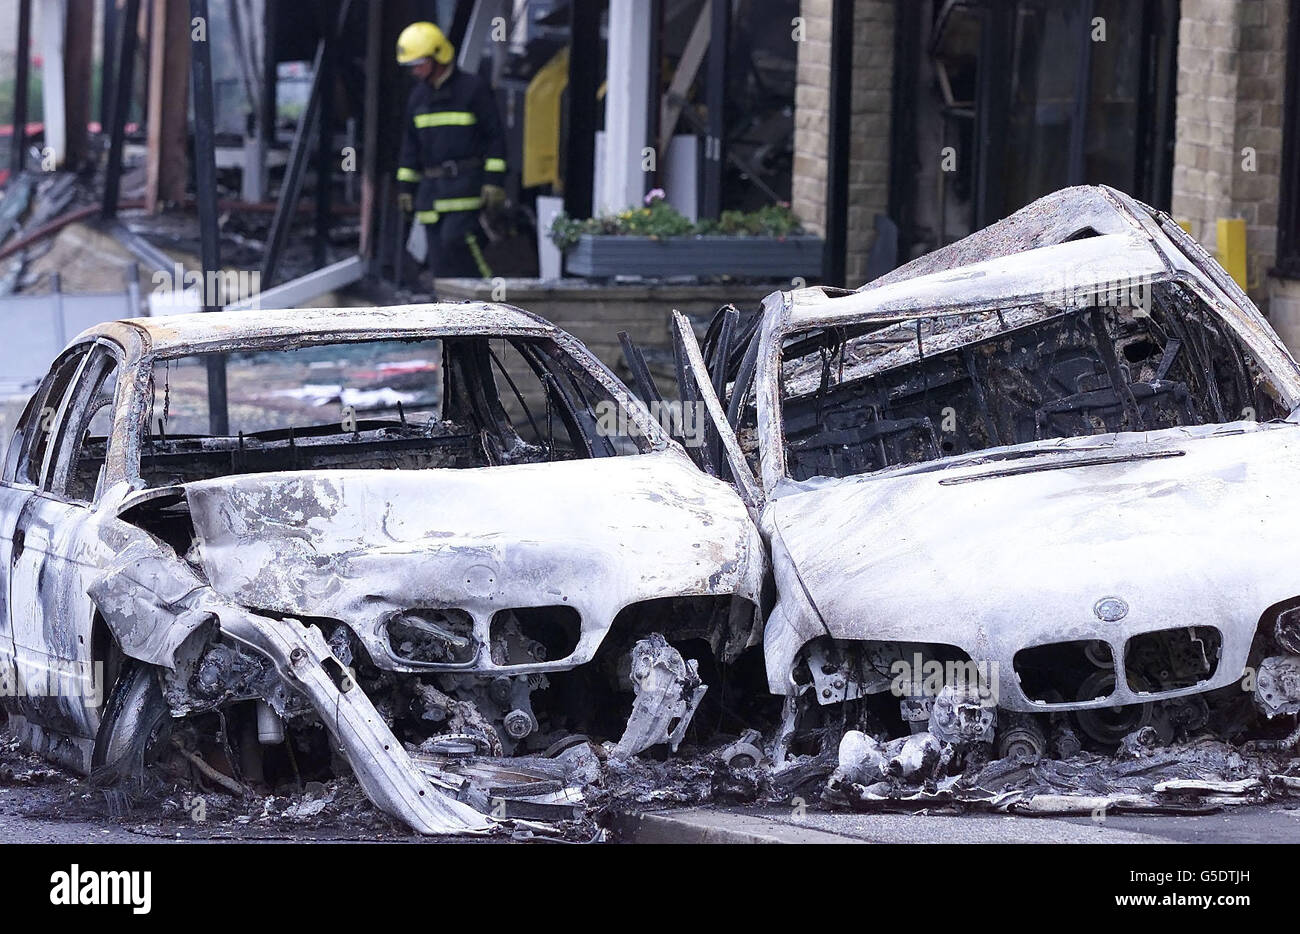 A firefighter leaves the remains of a BMW showroom in Bradford which was burned out and over 14 brand new BMW cars torched, during violence in the town. Stock Photo